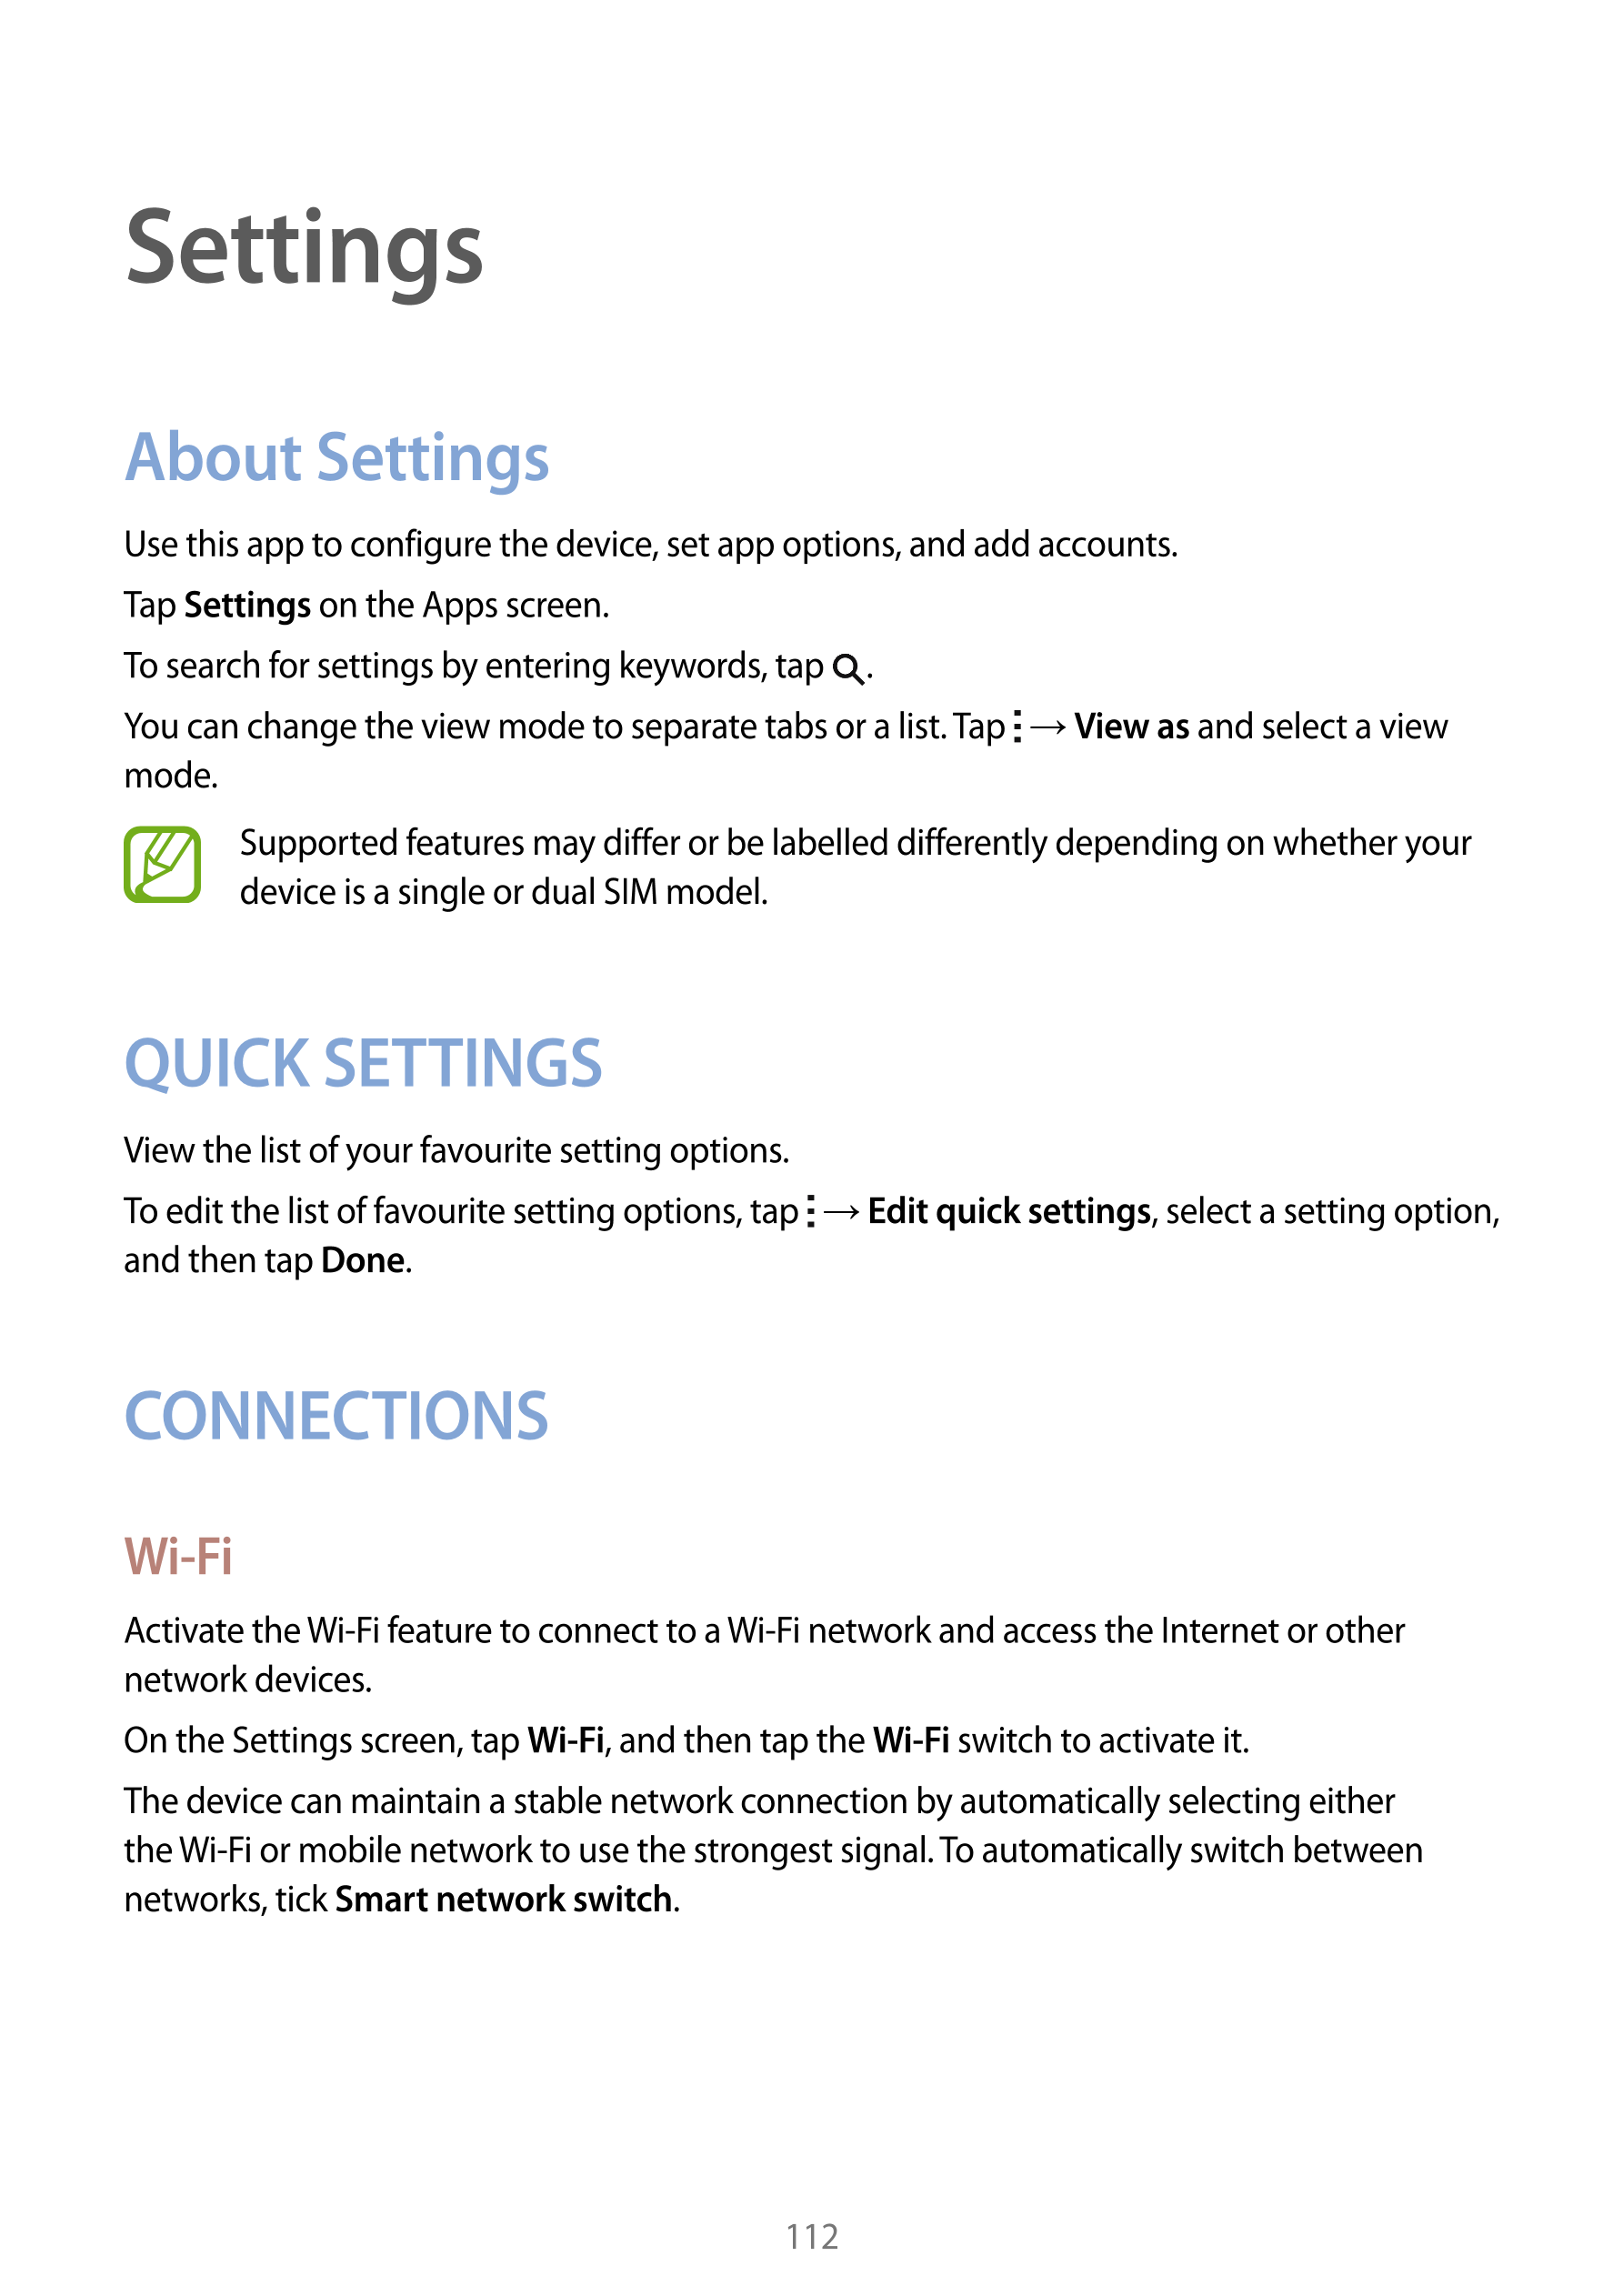 Settings
About Settings
Use this app to configure the device, set app options, and add accounts.
Tap  Settings on the Apps scree